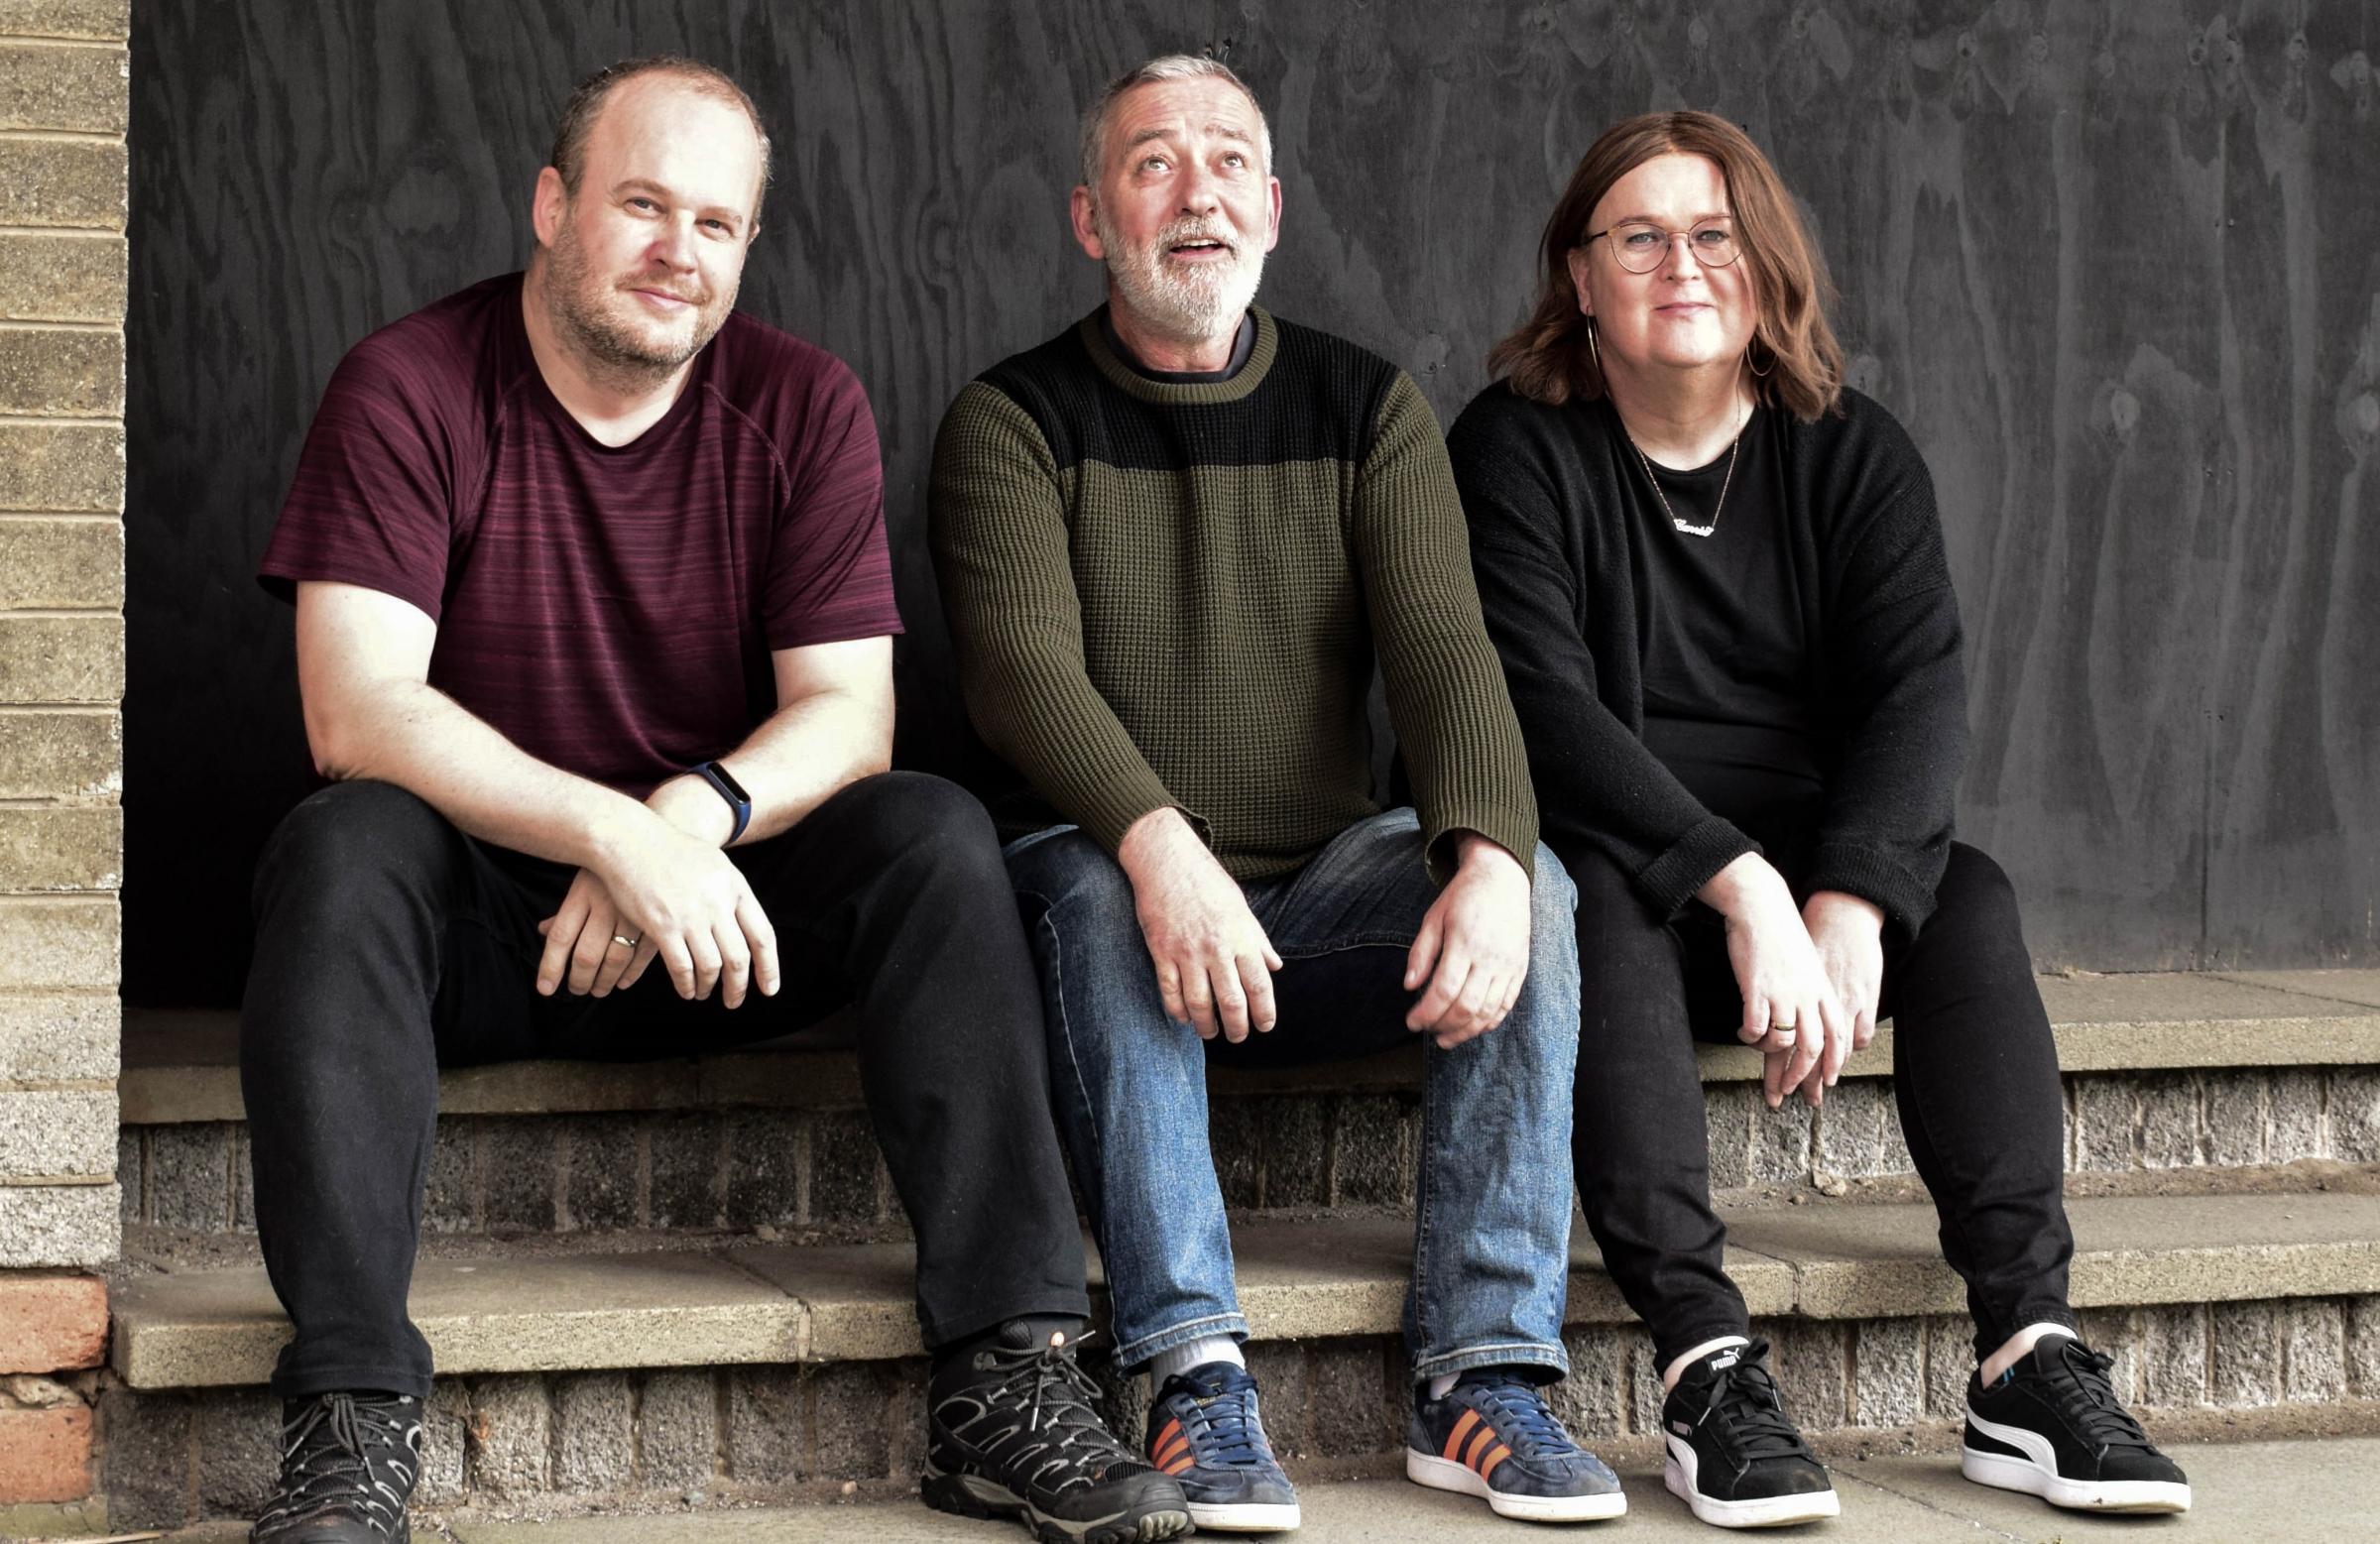 HAVR is a three-piece based in Glasgow made up of by Carrie Marshall, Kenny Martin and David Marshall